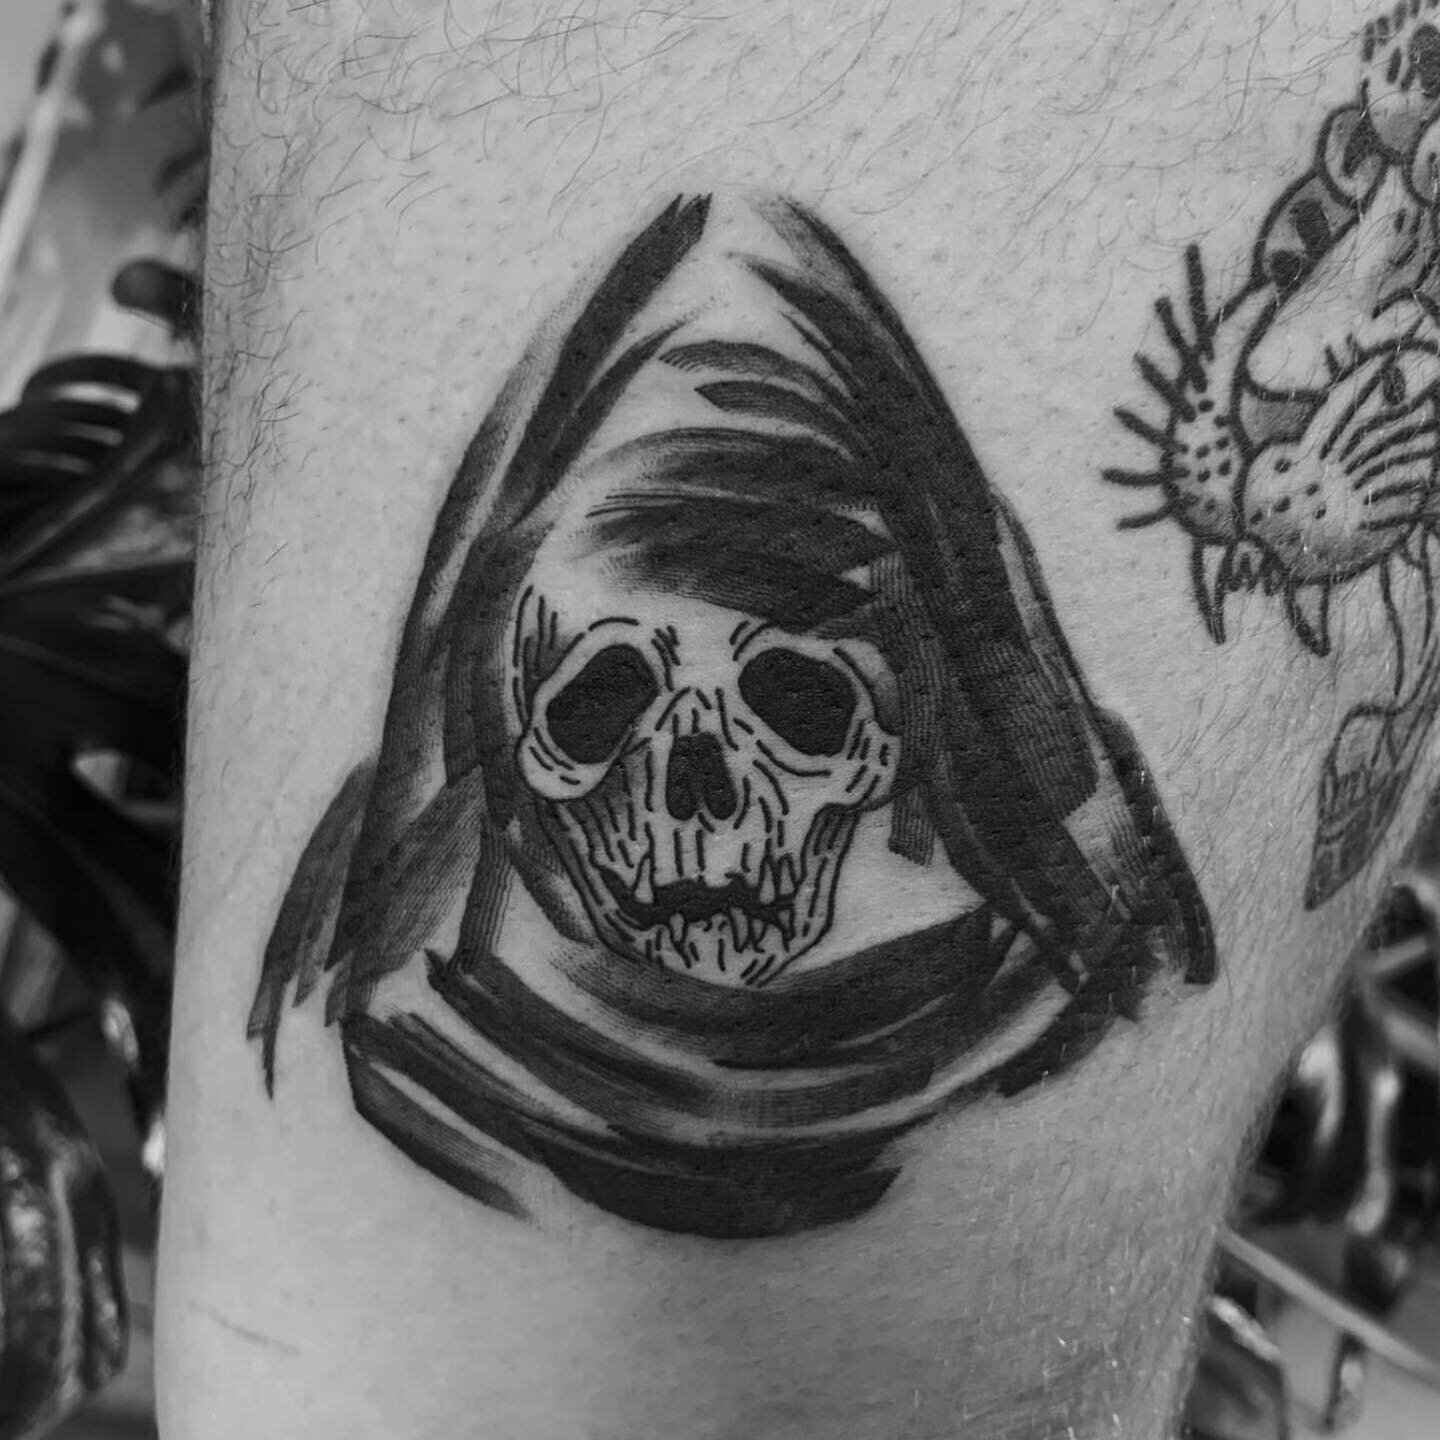 A couple of amazing reapers by the death dealer @vatiss 
.
.
.
.
.
.
.
.
.
.
#tattoo #tattooartist #blacktattoo #blacktattooart #blackworktattoo #reaper #reapertattoo #grimreaper #grimreapertattoo #illustrativetattoo #paintstroketattoo #wollongong #w